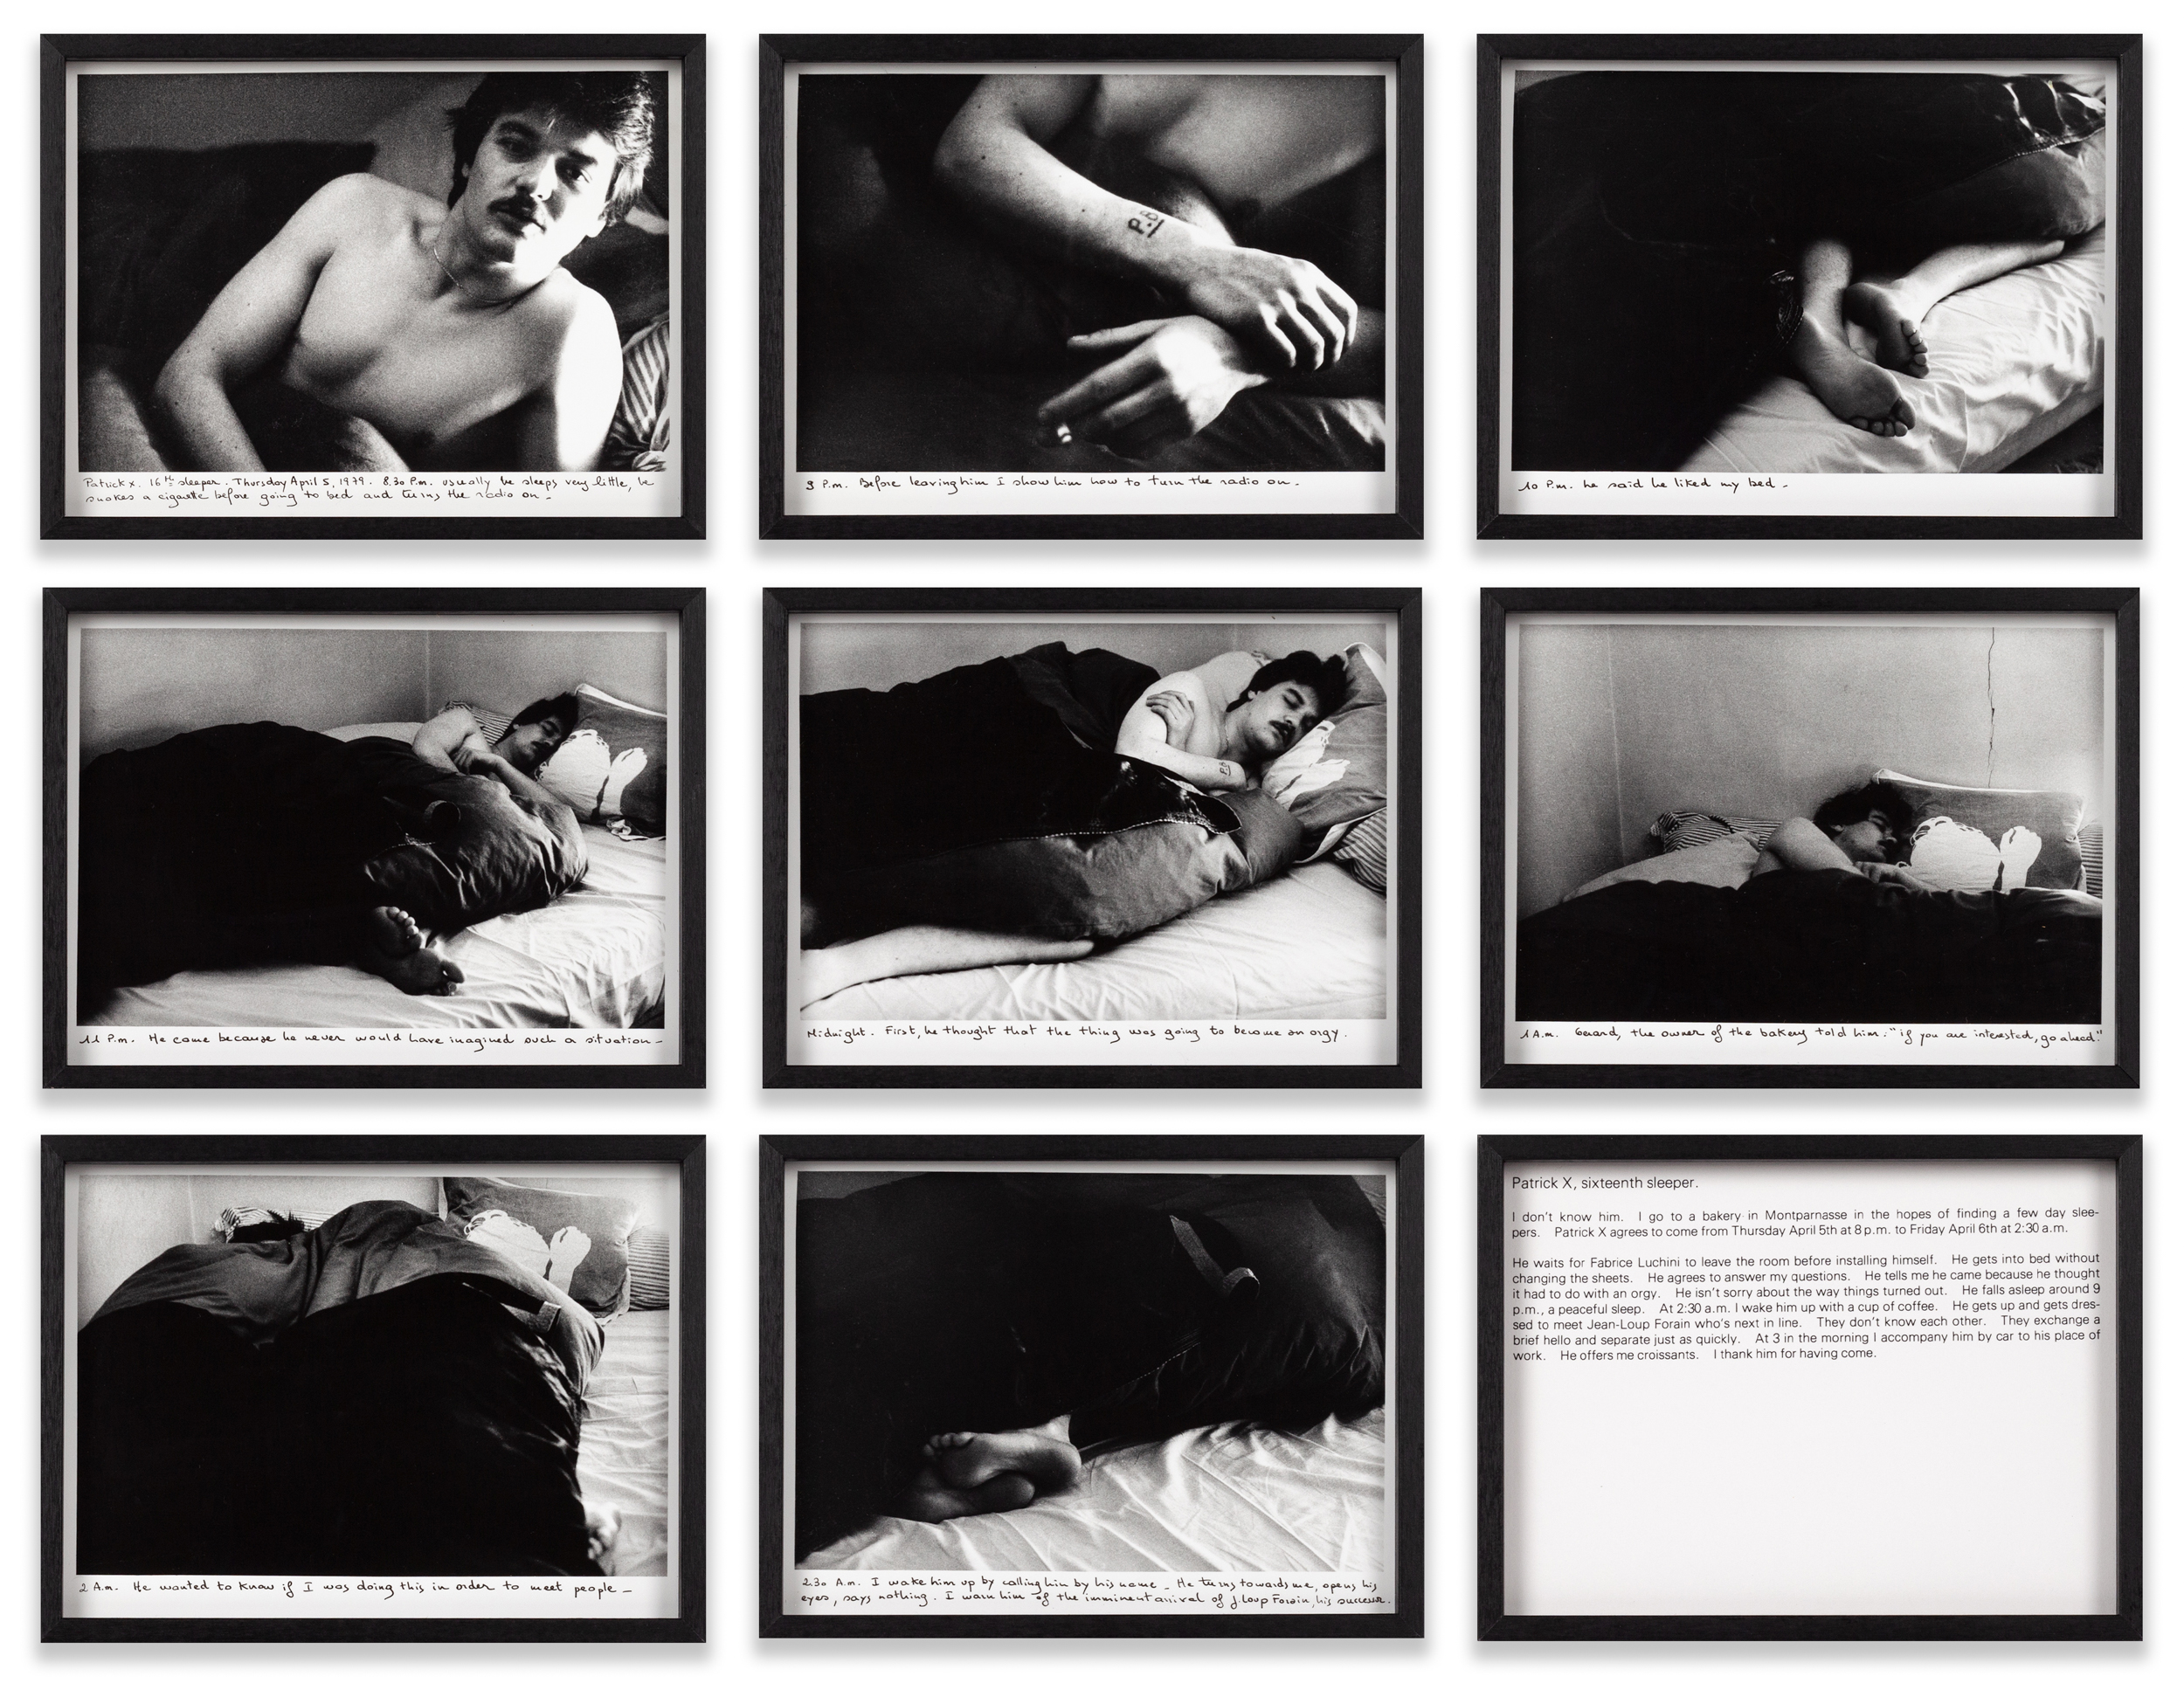 Suite of eight black and white photographs and one text panel framed in black